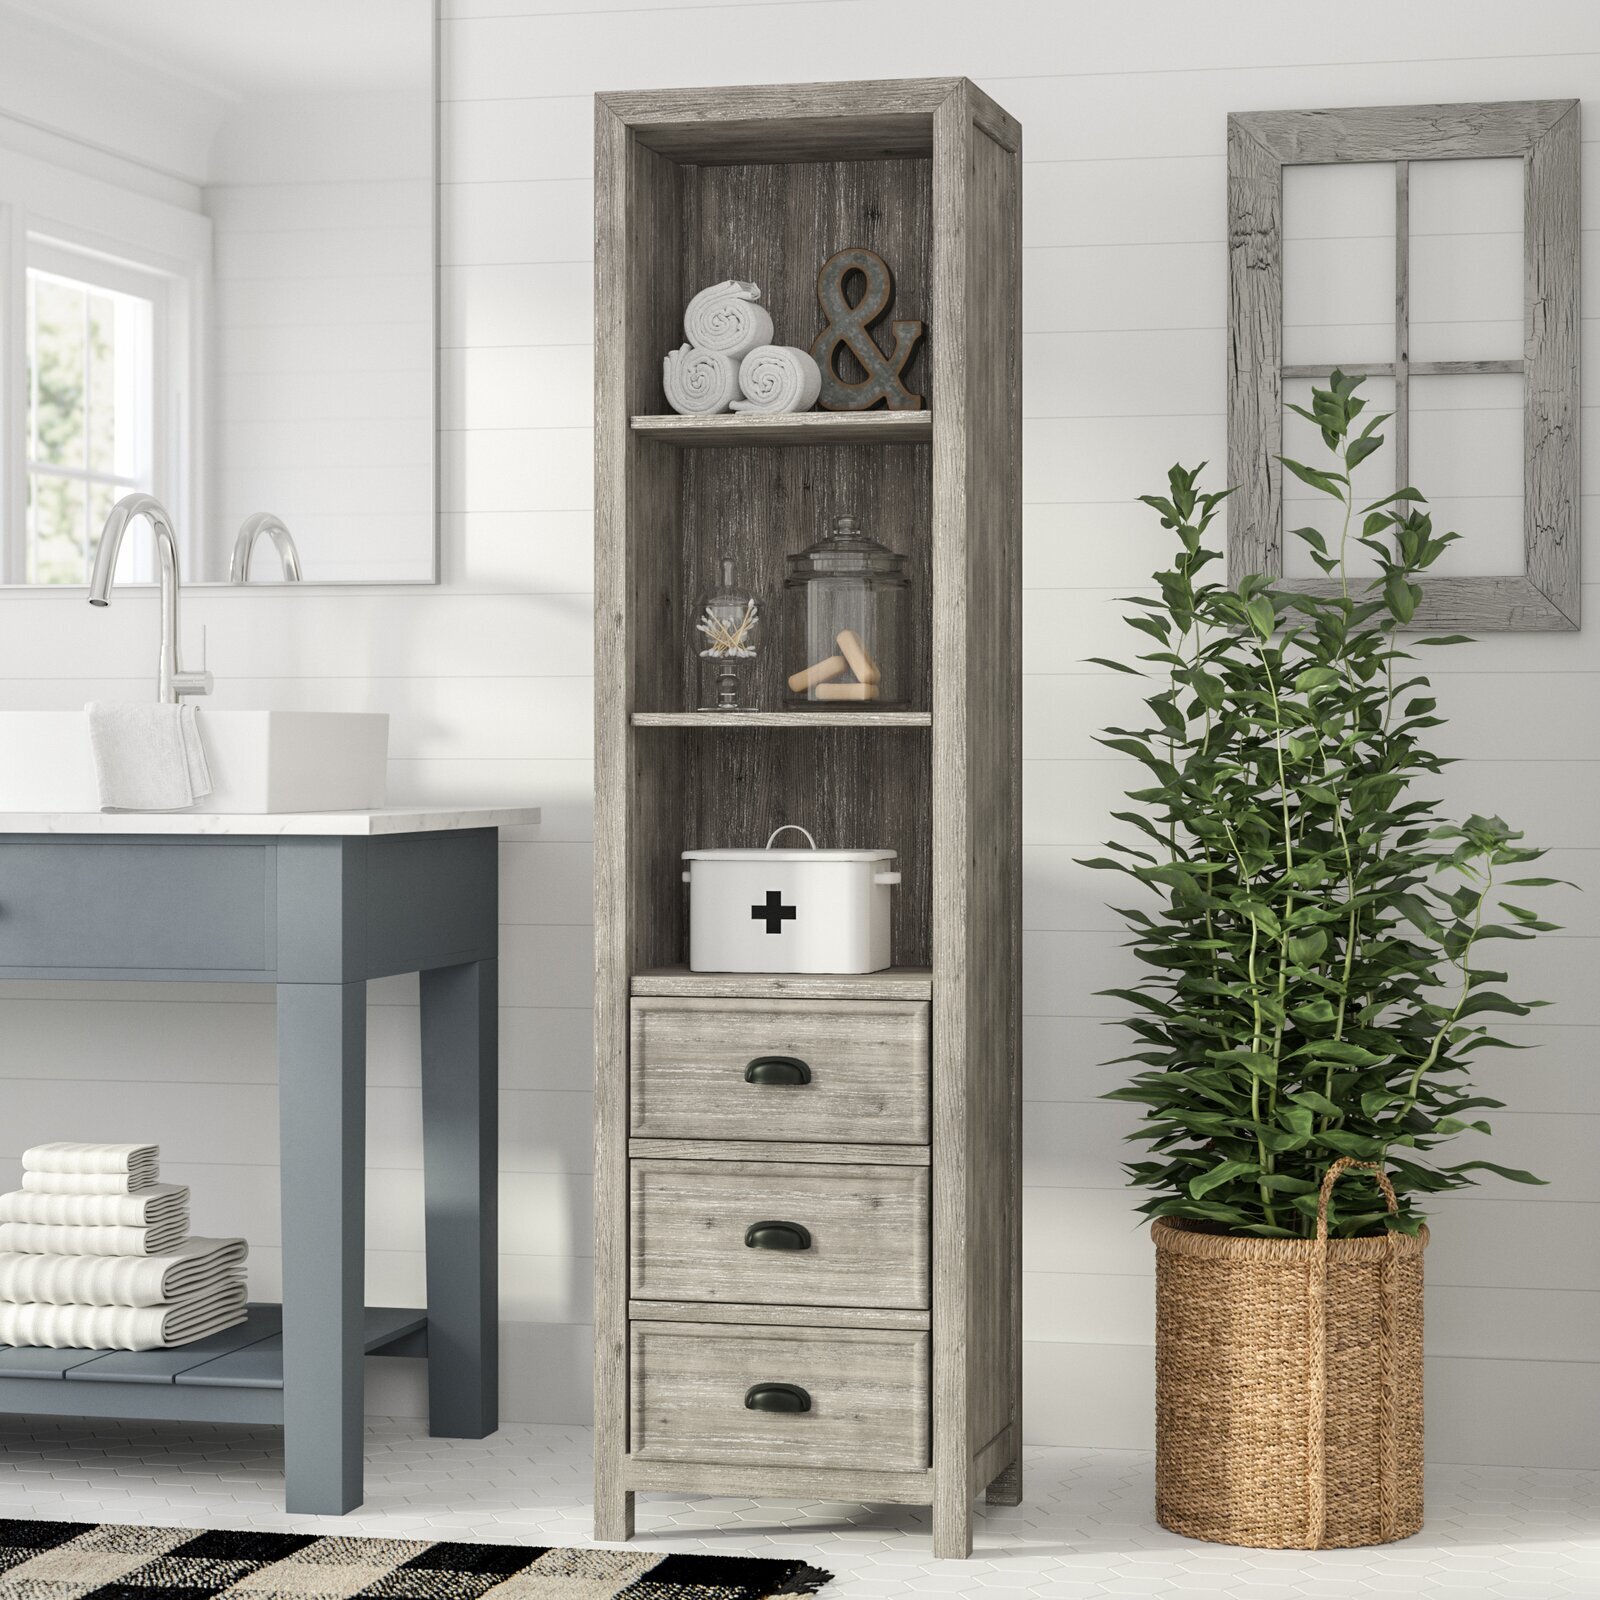 Open shelving and closed drawers: a versatile bathroom cabinet